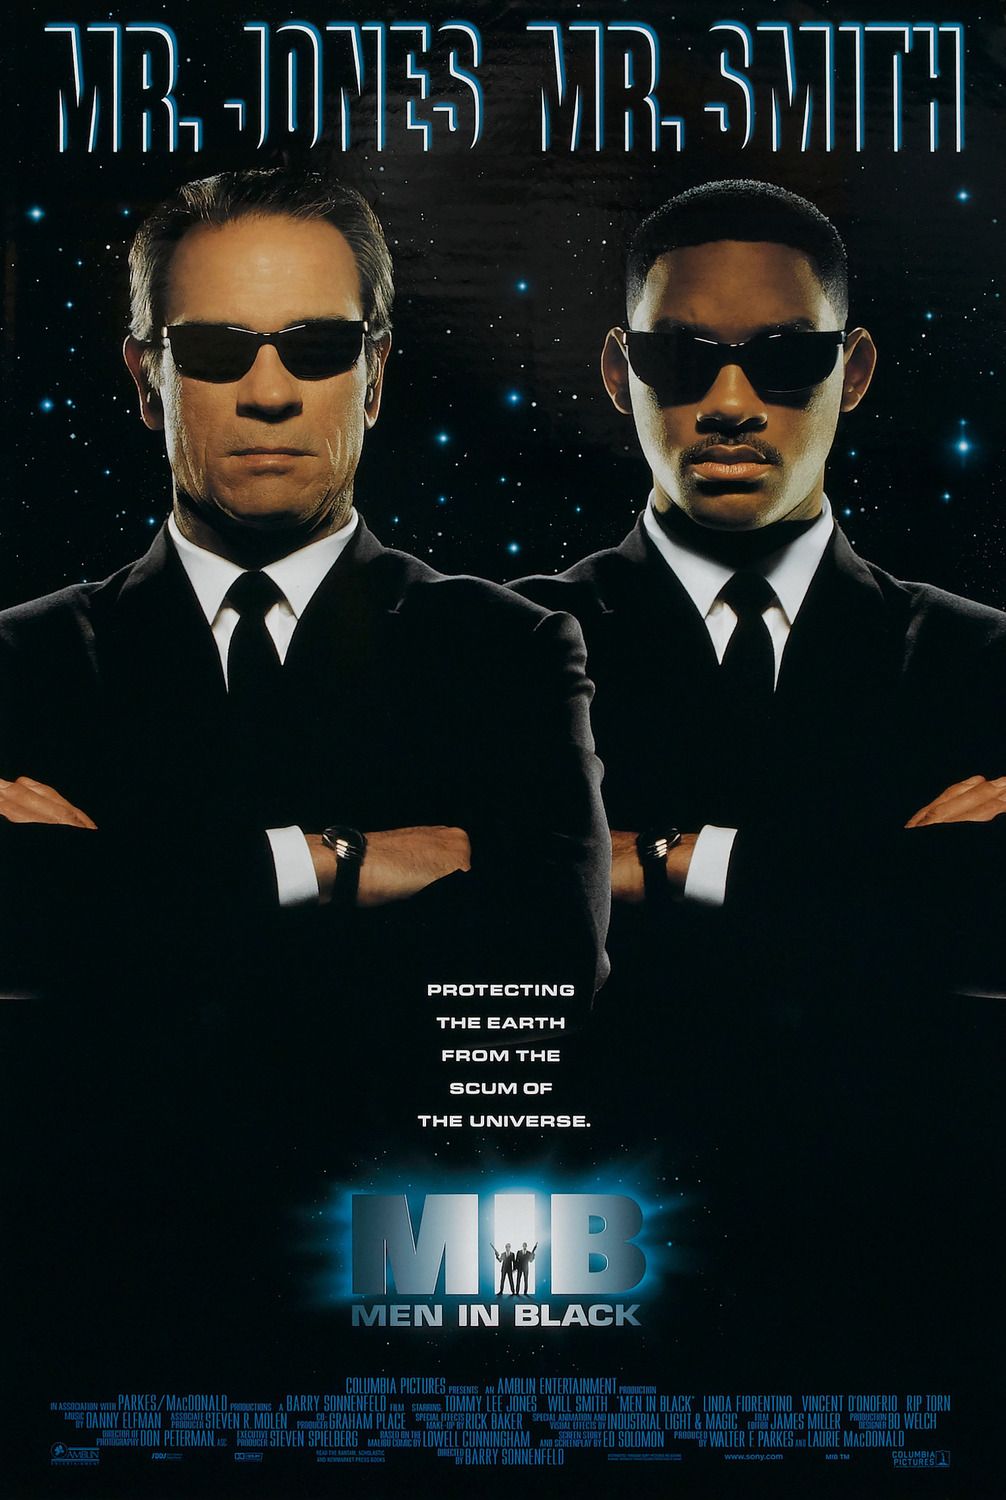 Men In Black 5: Will It Happen? Everything We Know